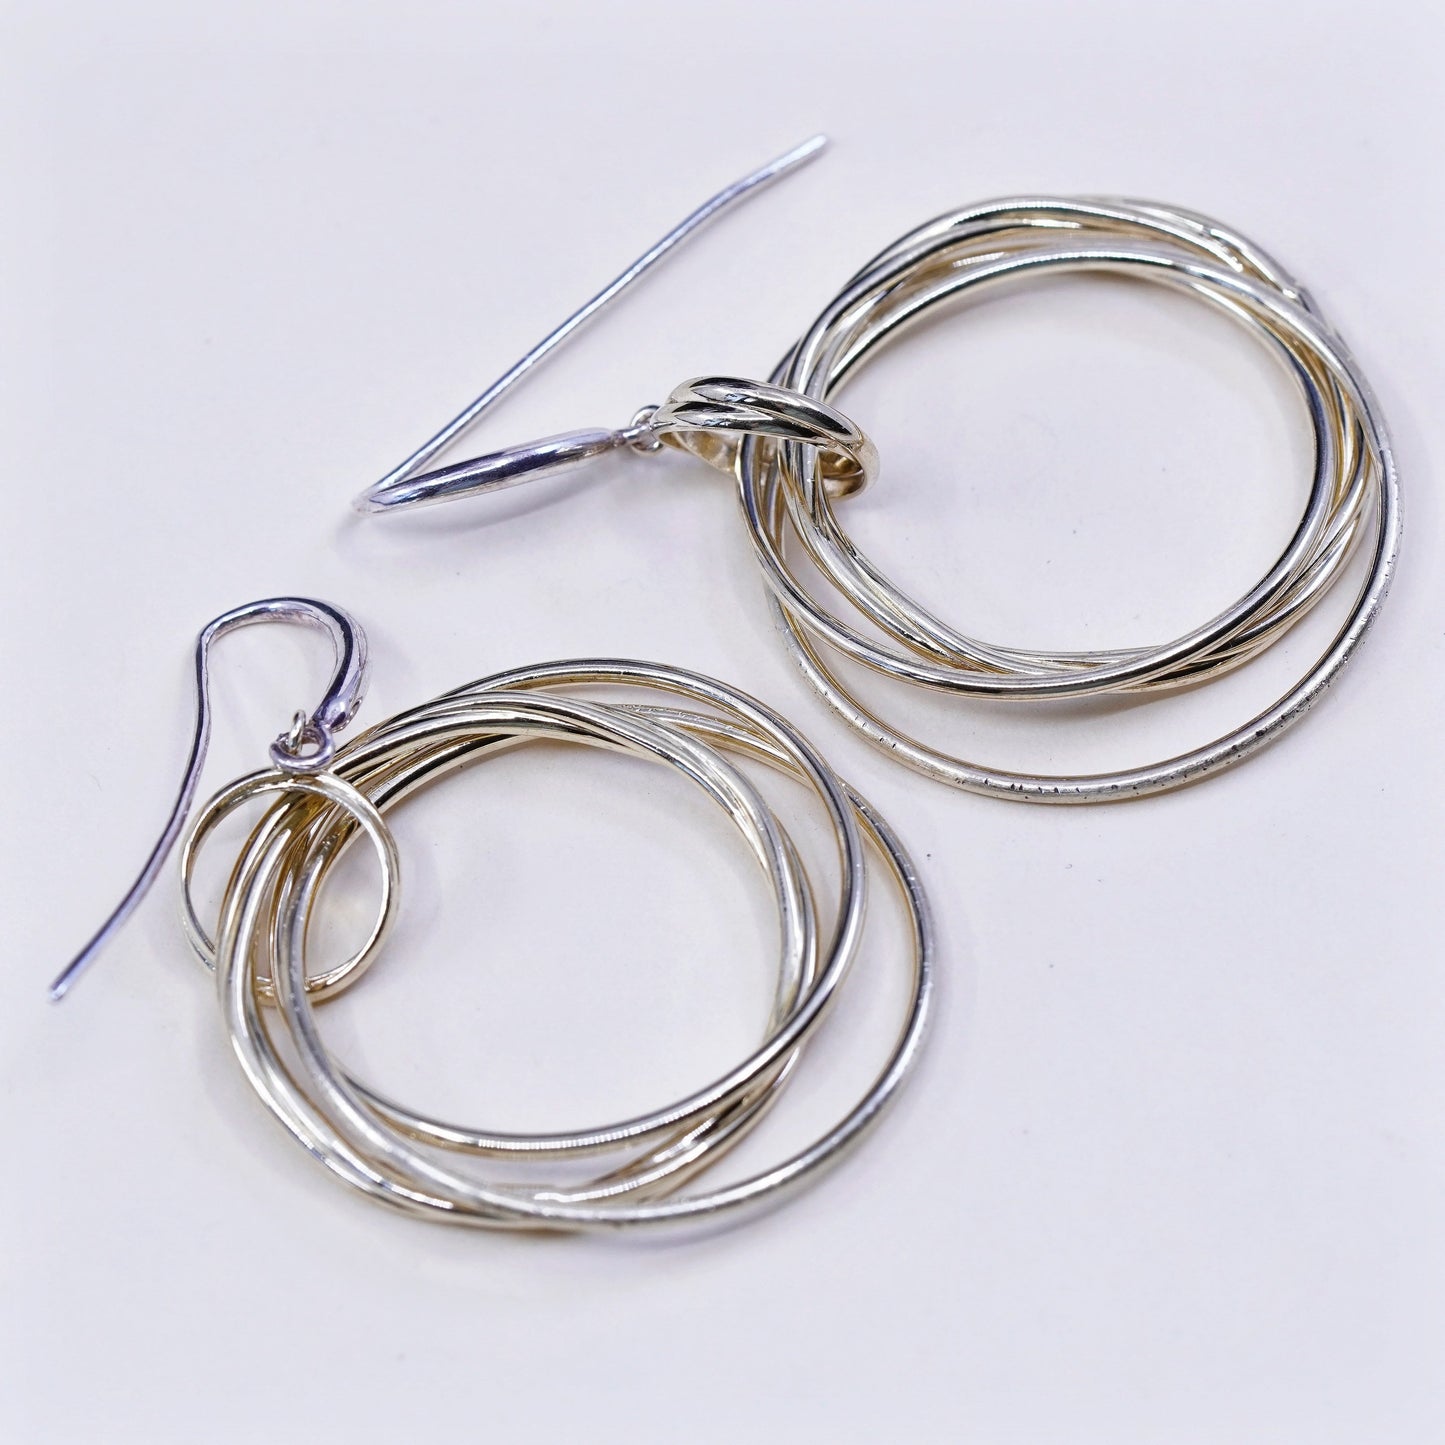 Vintage two tone sterling 925 silver drop earrings with entwined circle